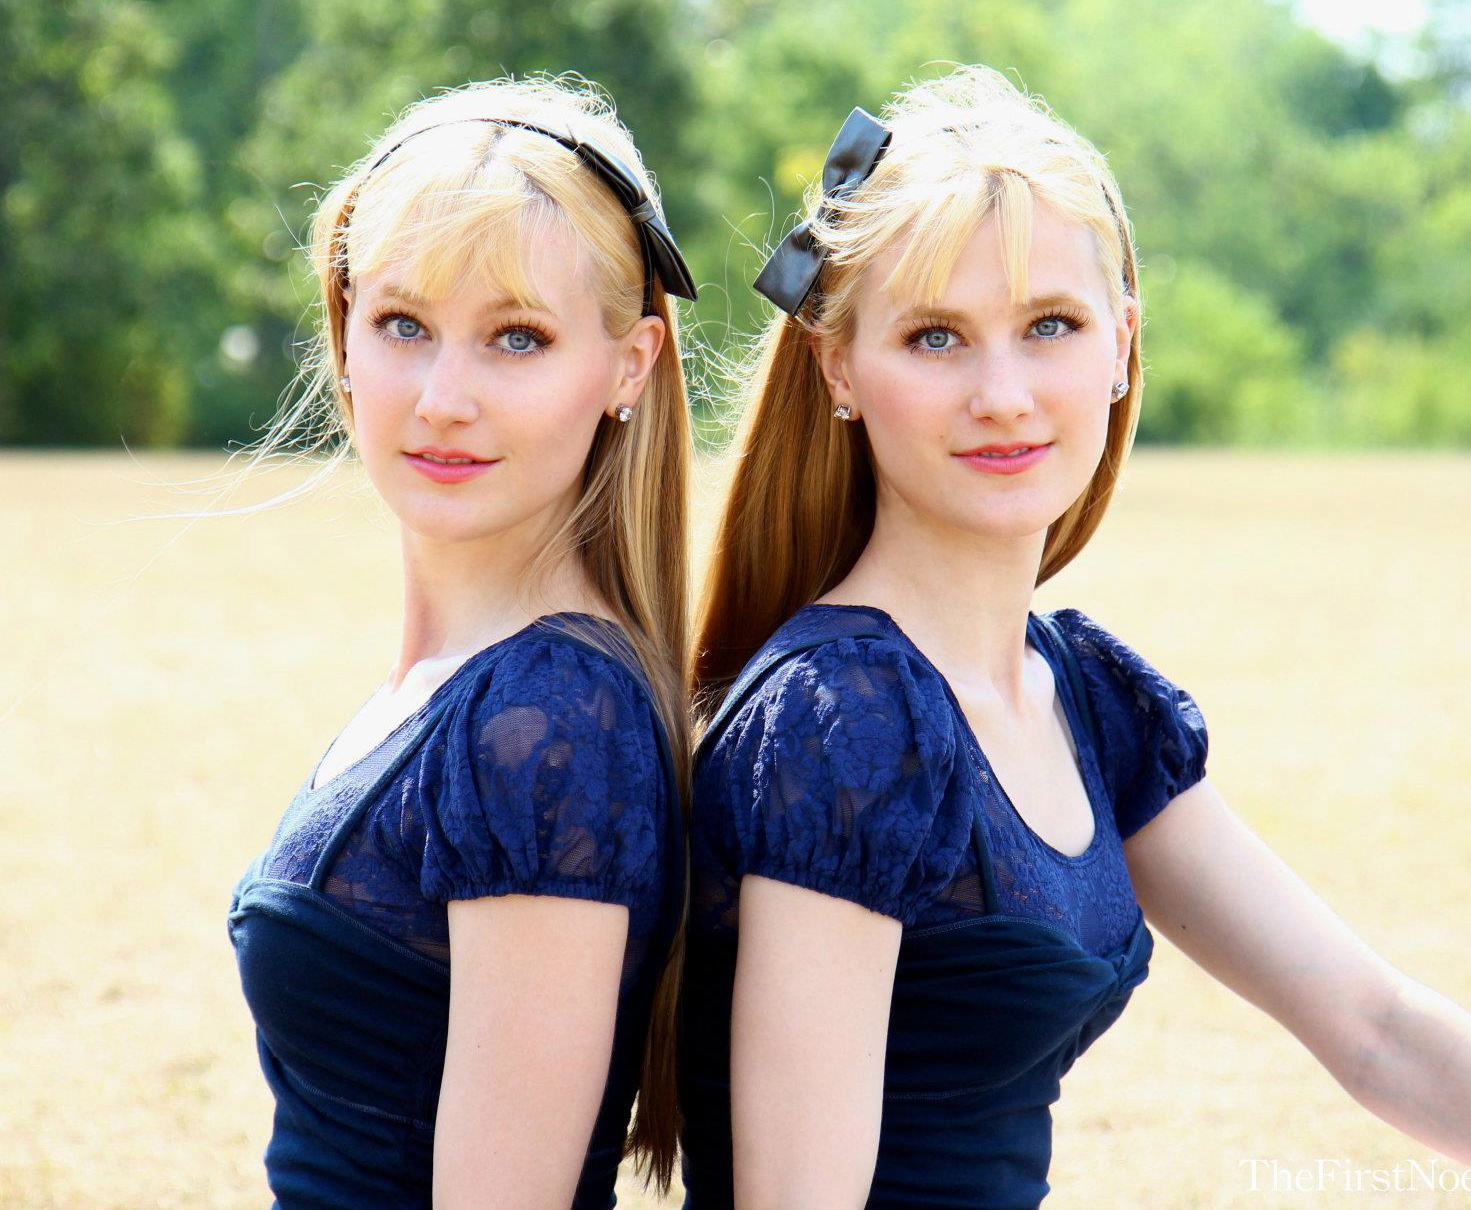 Camille and Kennerly Kitt (The Harp Twins) .